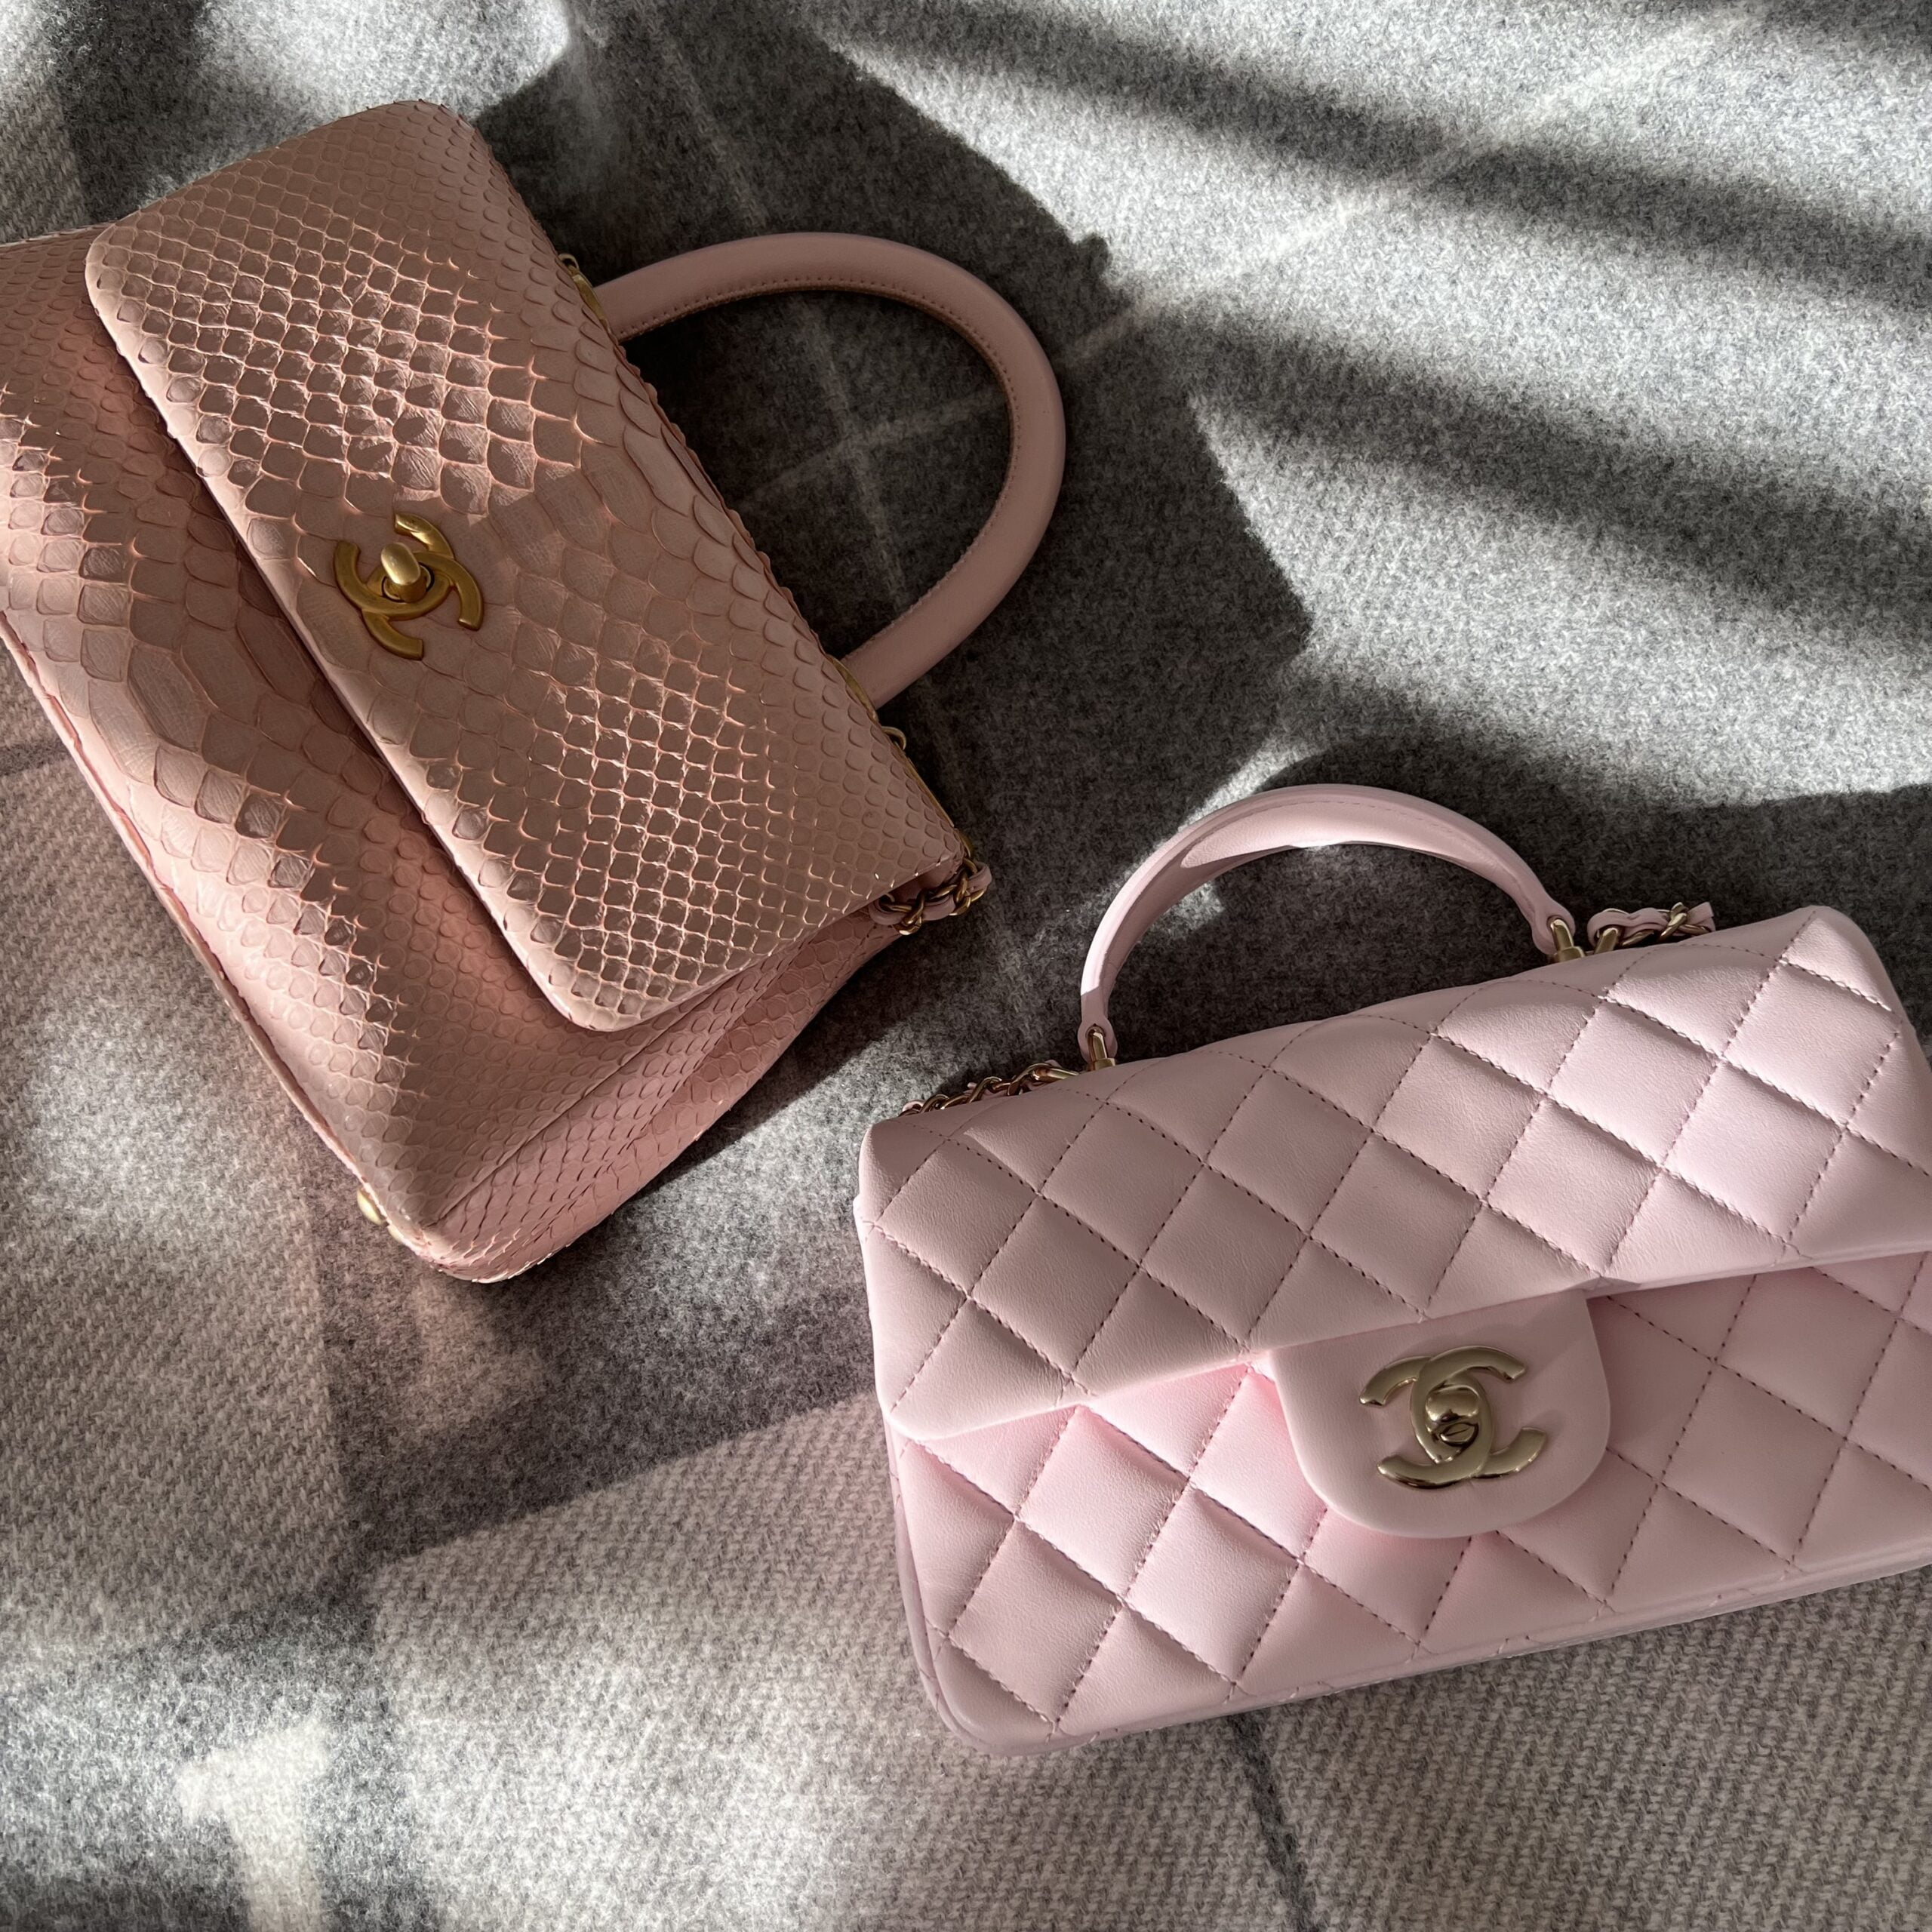 chanel bag and purse